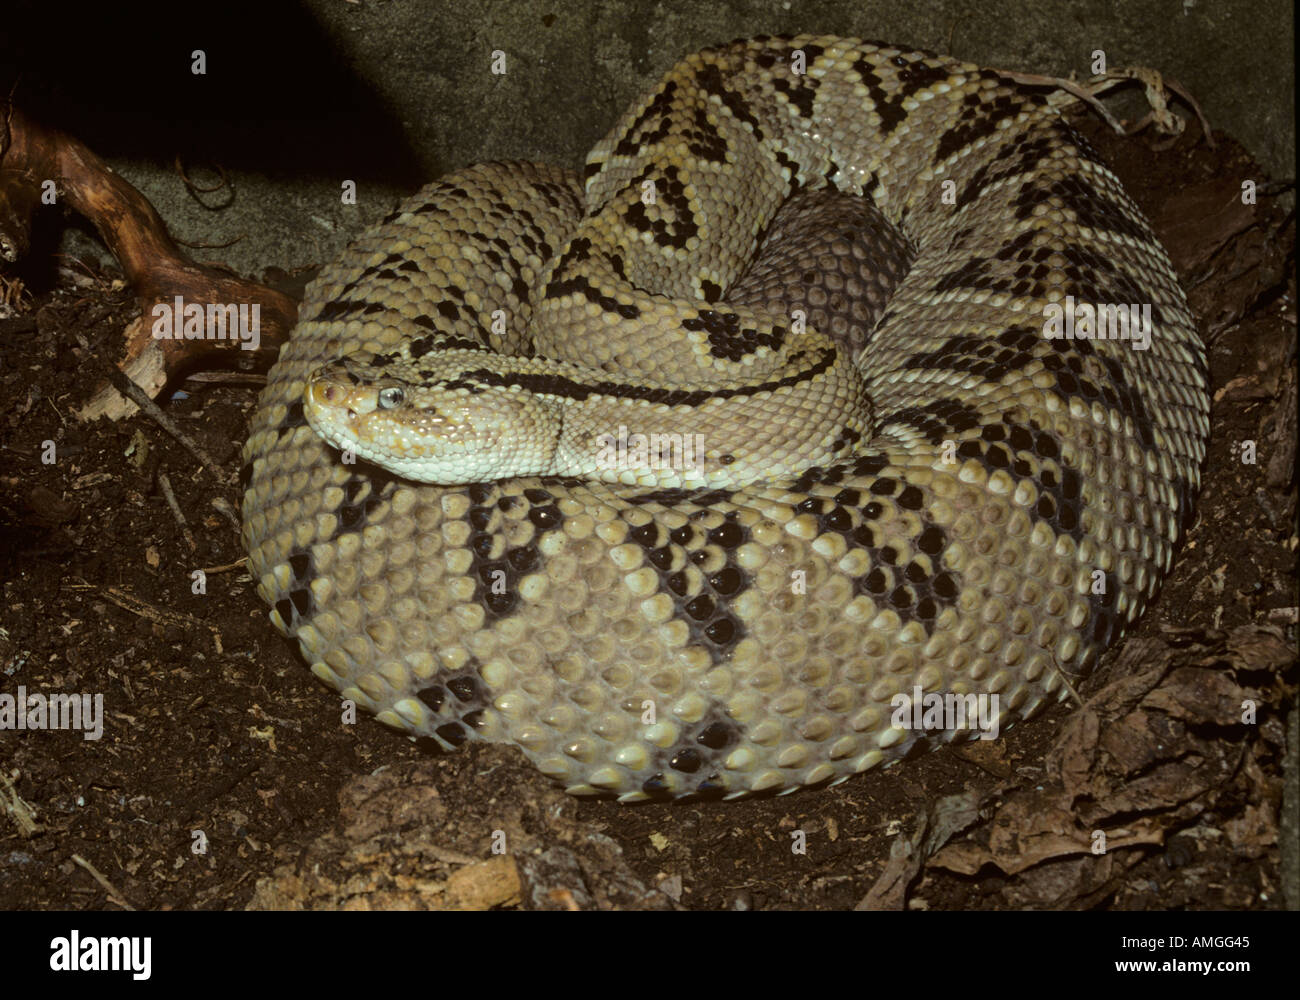 Neo Tropical Rattle Snake Crotalus durissus culminatus Stock Photo